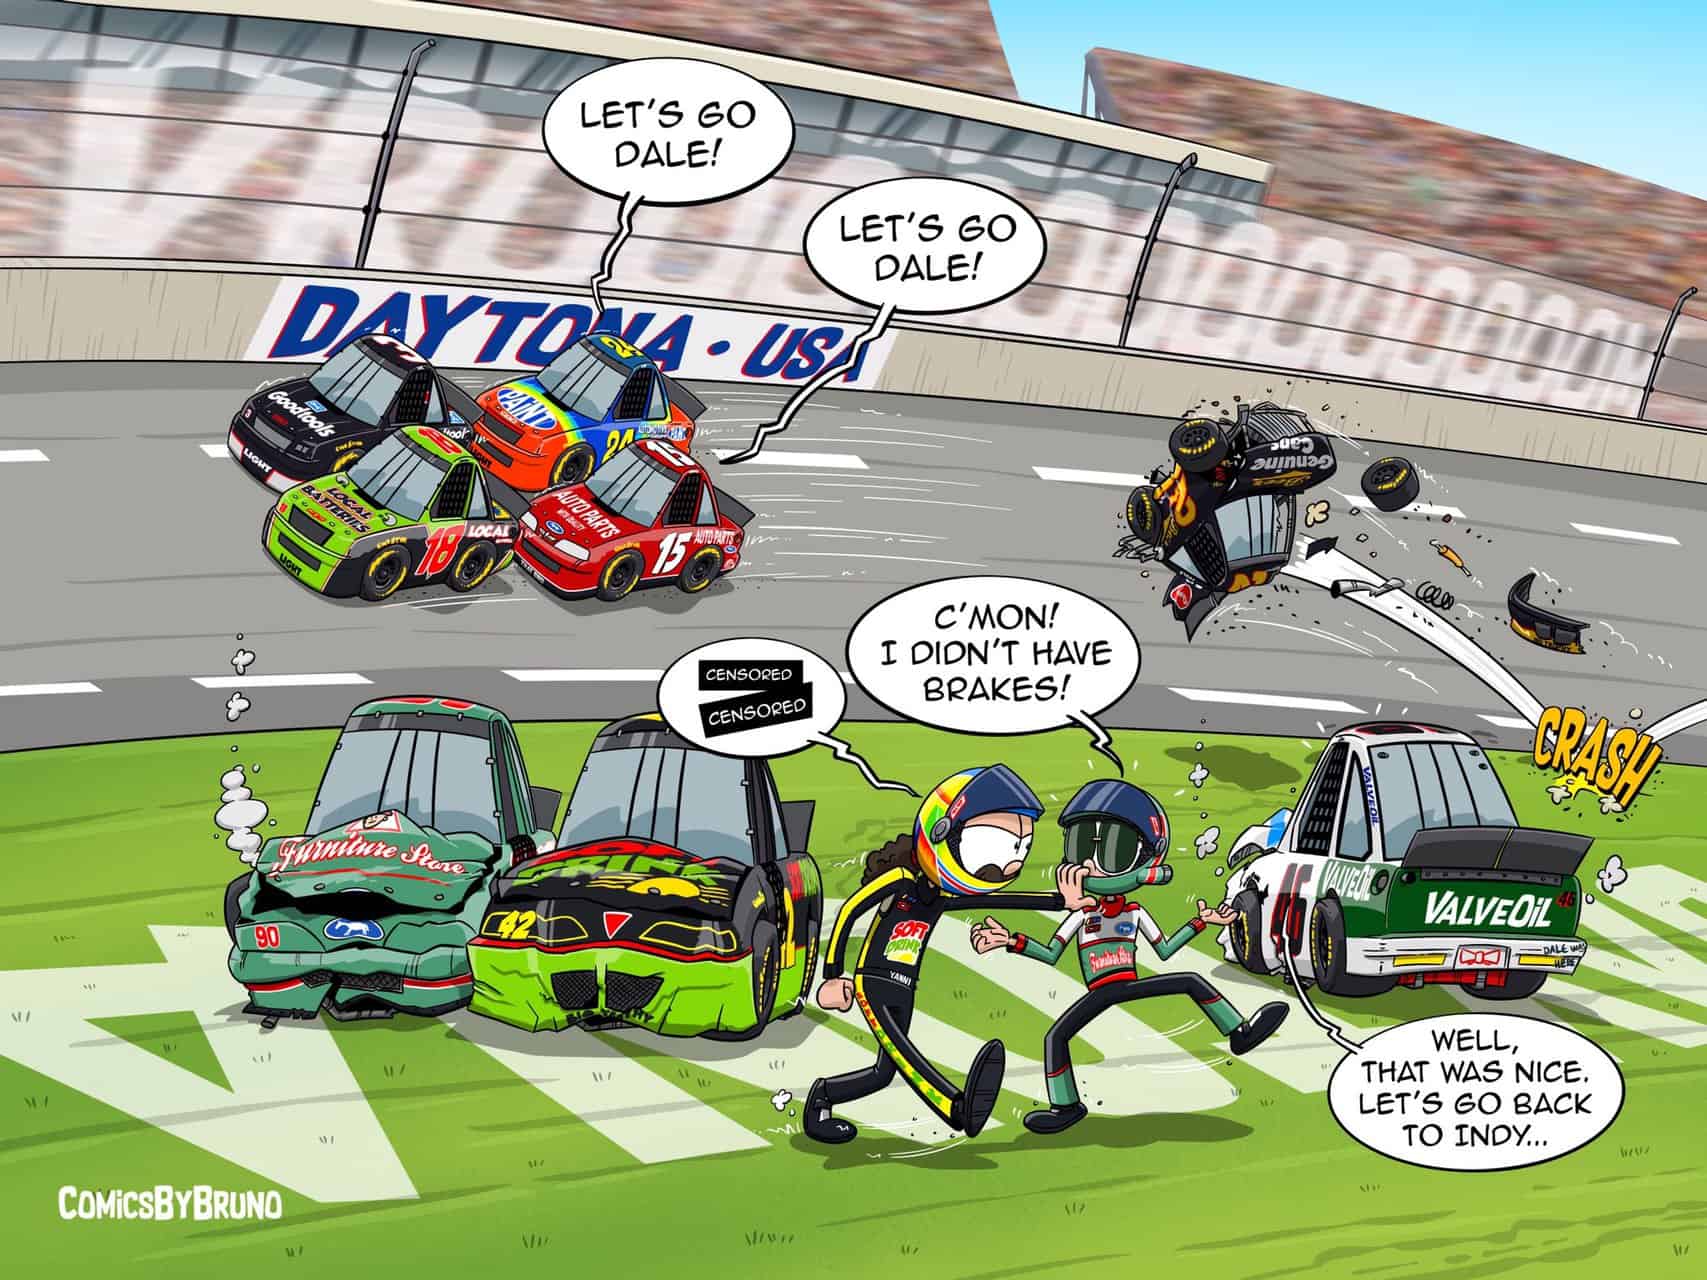 Comic Artist Bruno Aguiar Is Humbled By NASCAR Nation